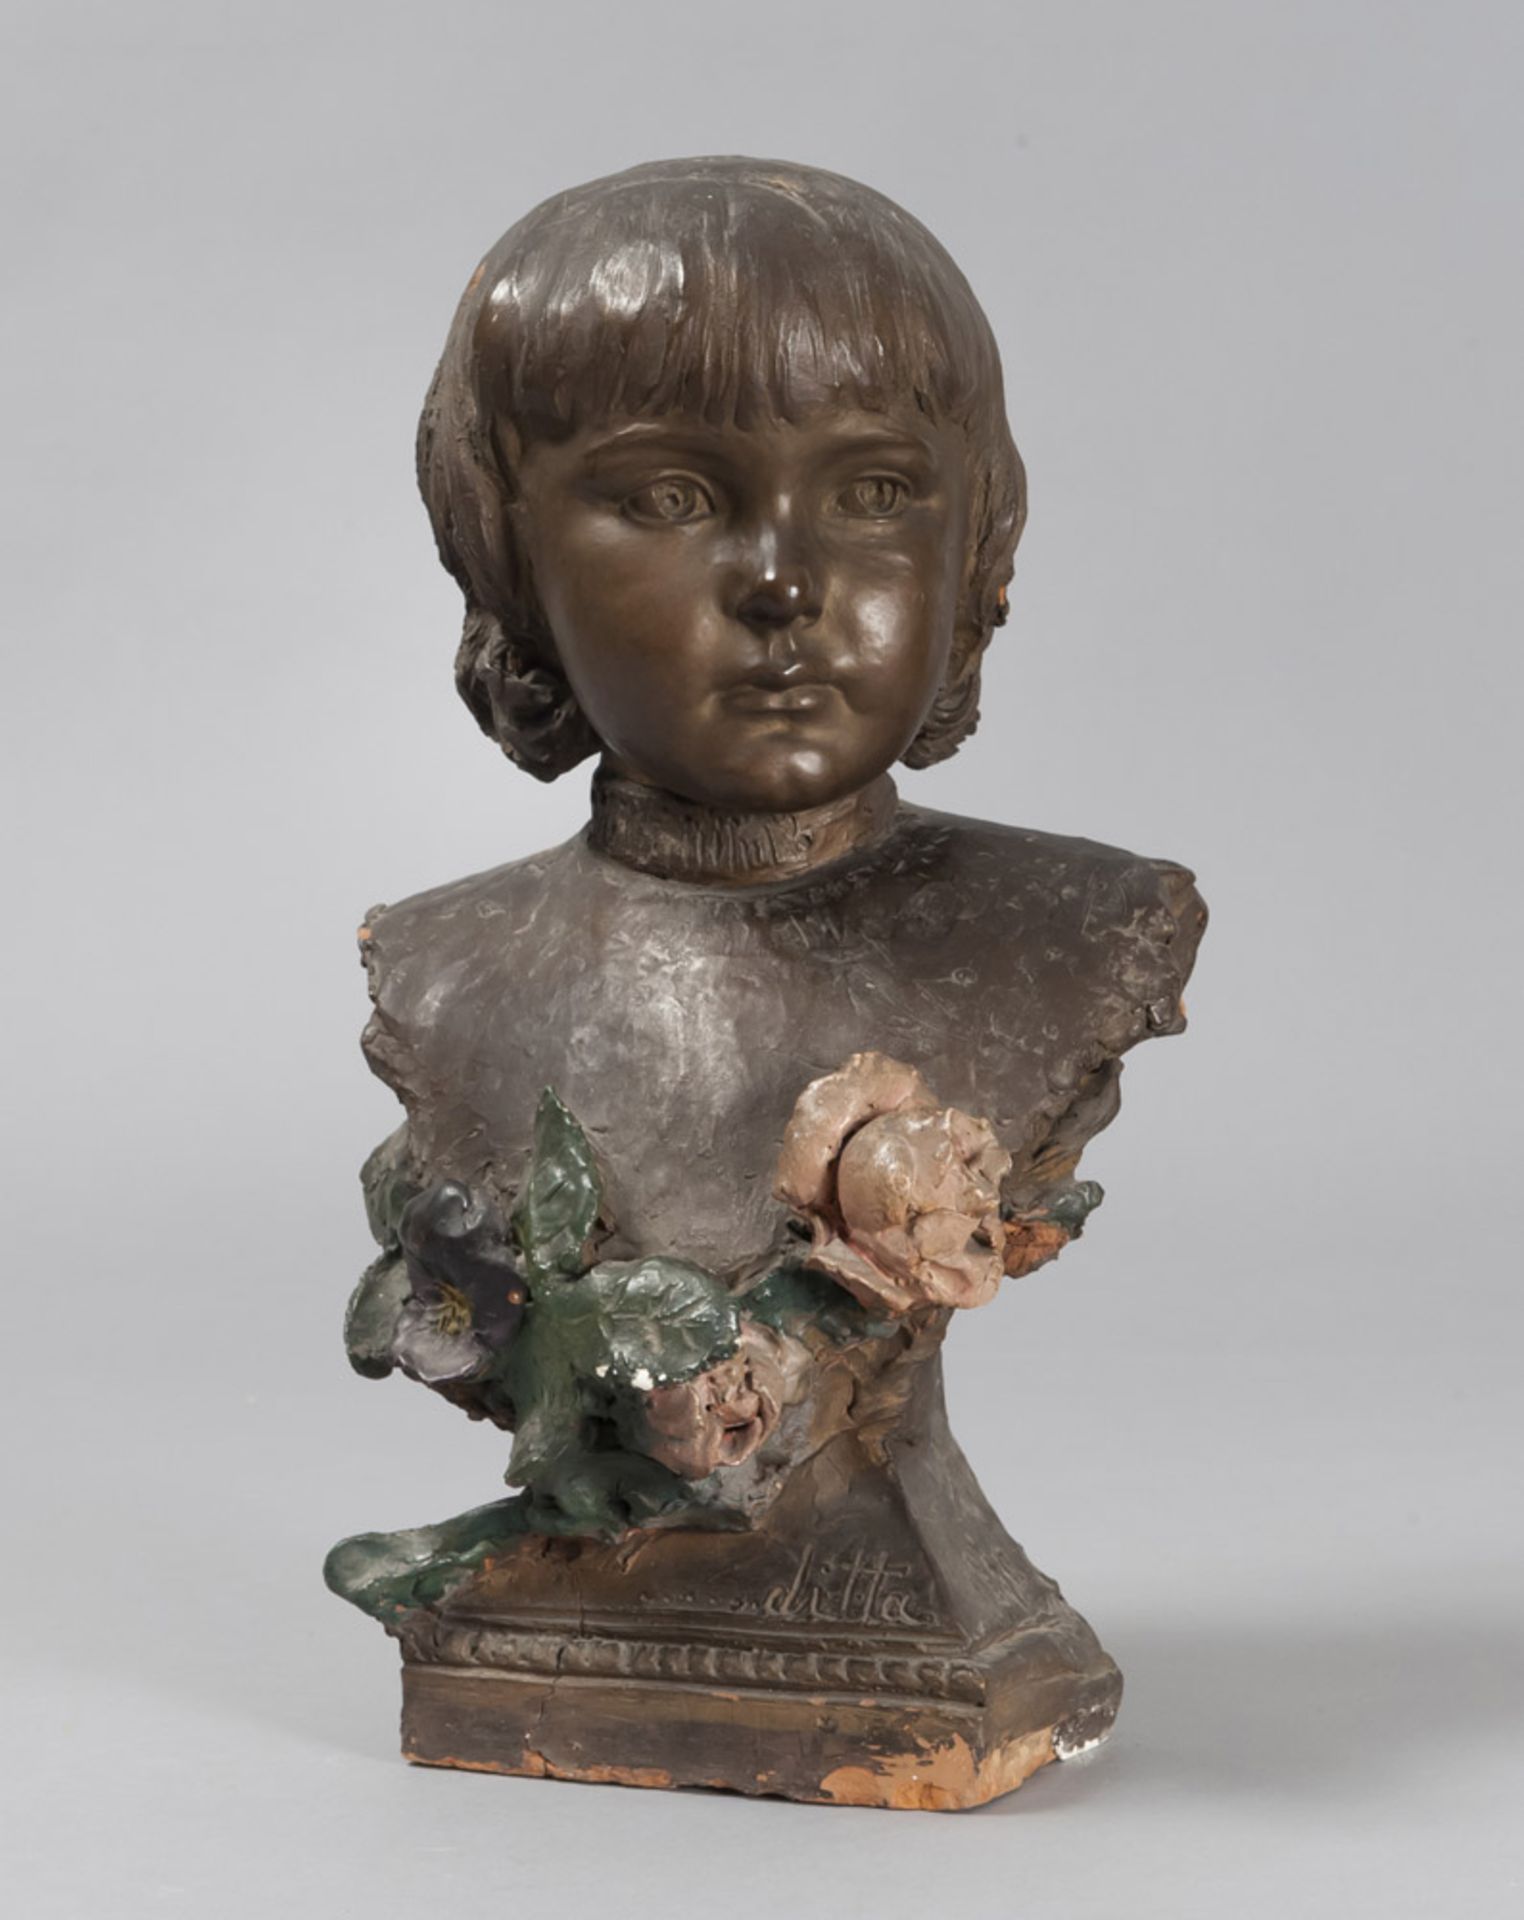 YOUNG GIRL'S BUST IN EARTHENWARE, EARLY 20TH CENTURY enamaled to fake bronze, with flowers in relief